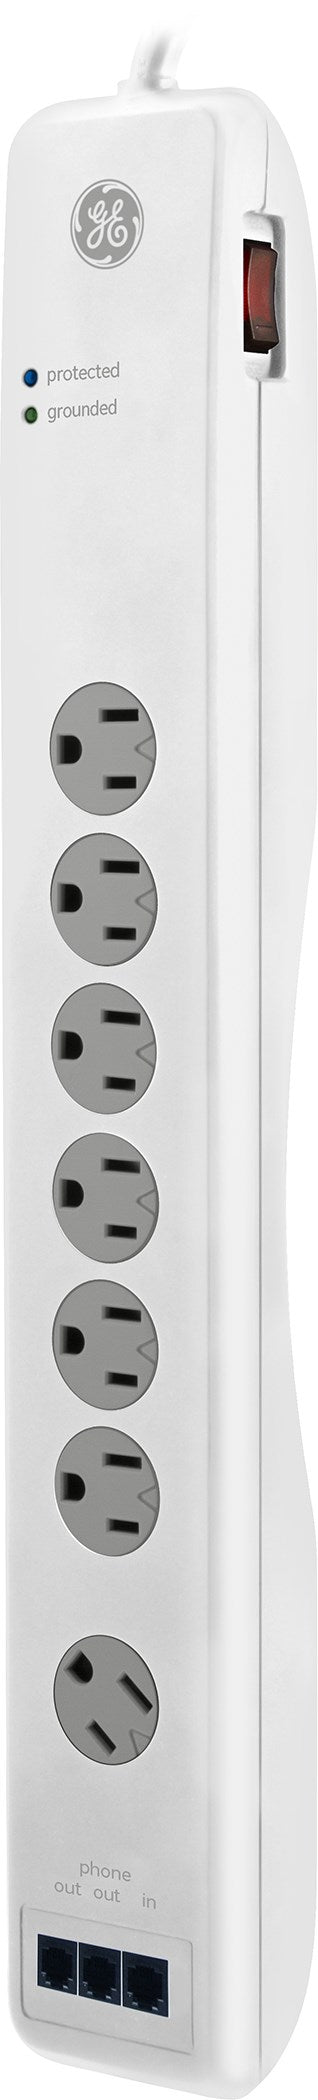 GE Jasco 14093 7 Outlet 1500 Joule White Surge Protector                                                                                              